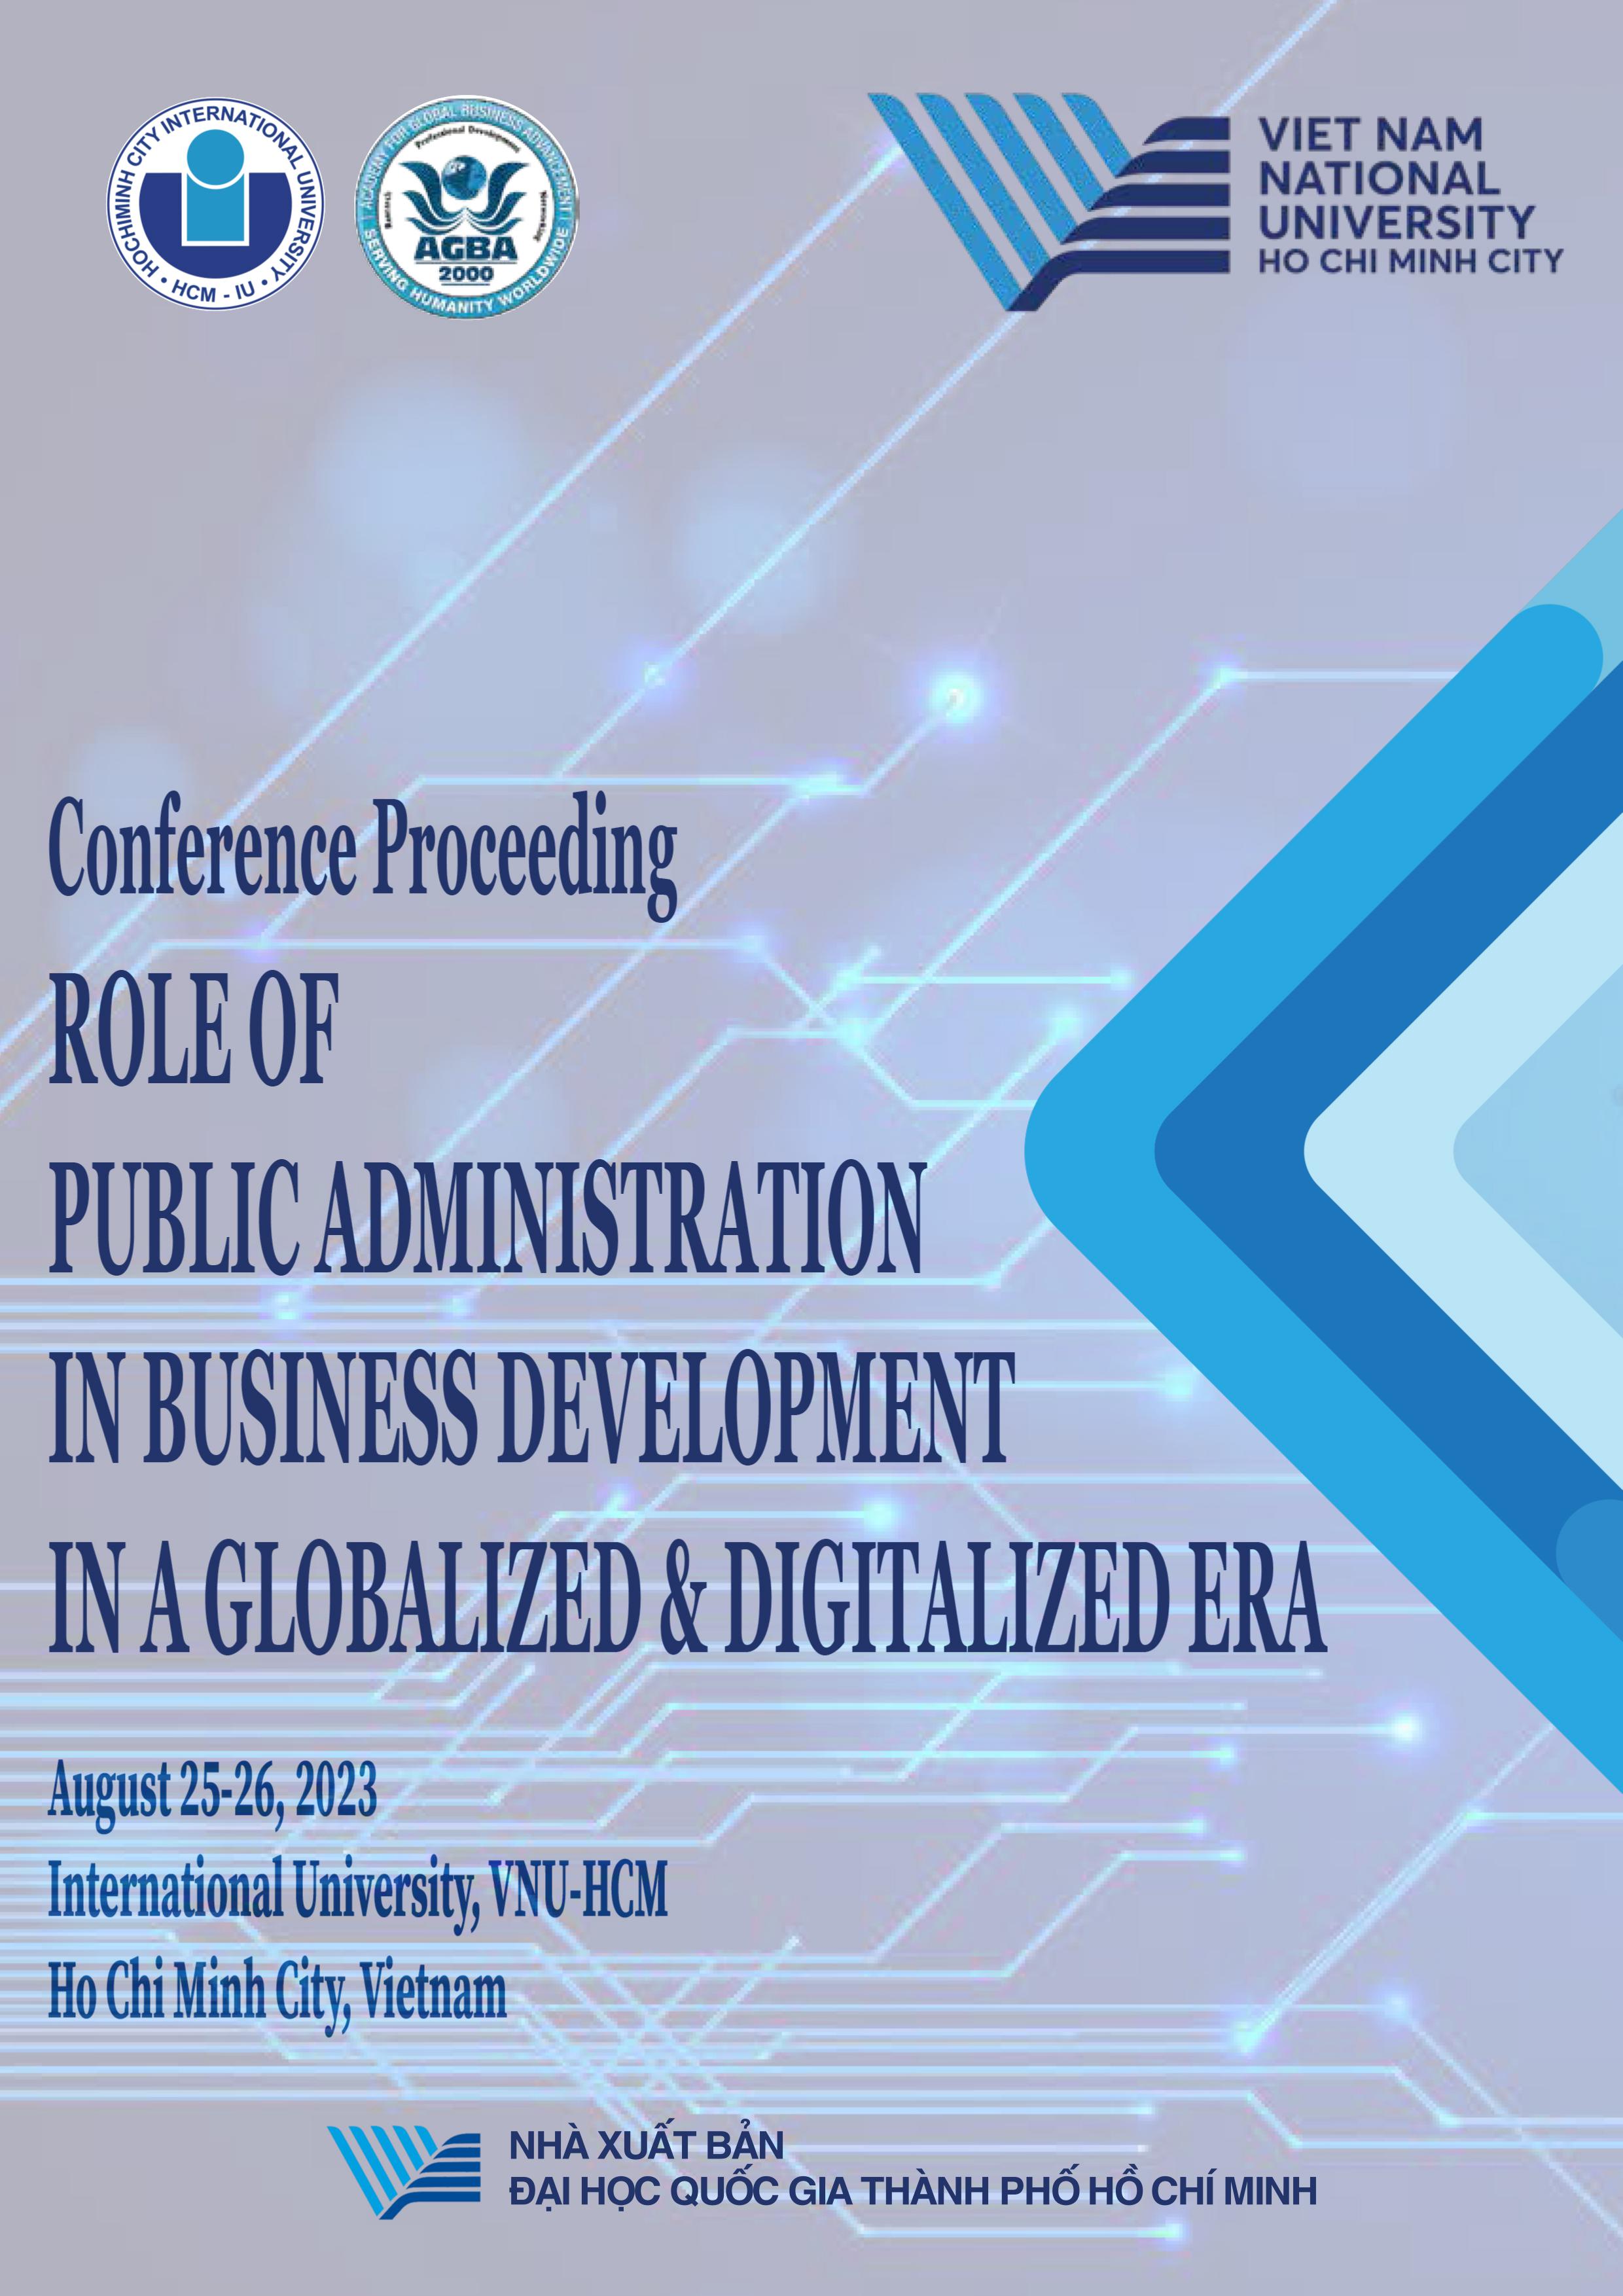 Conference Proceeding
“Role of Public Administration in Business Development in a Global & Digitalized Era”